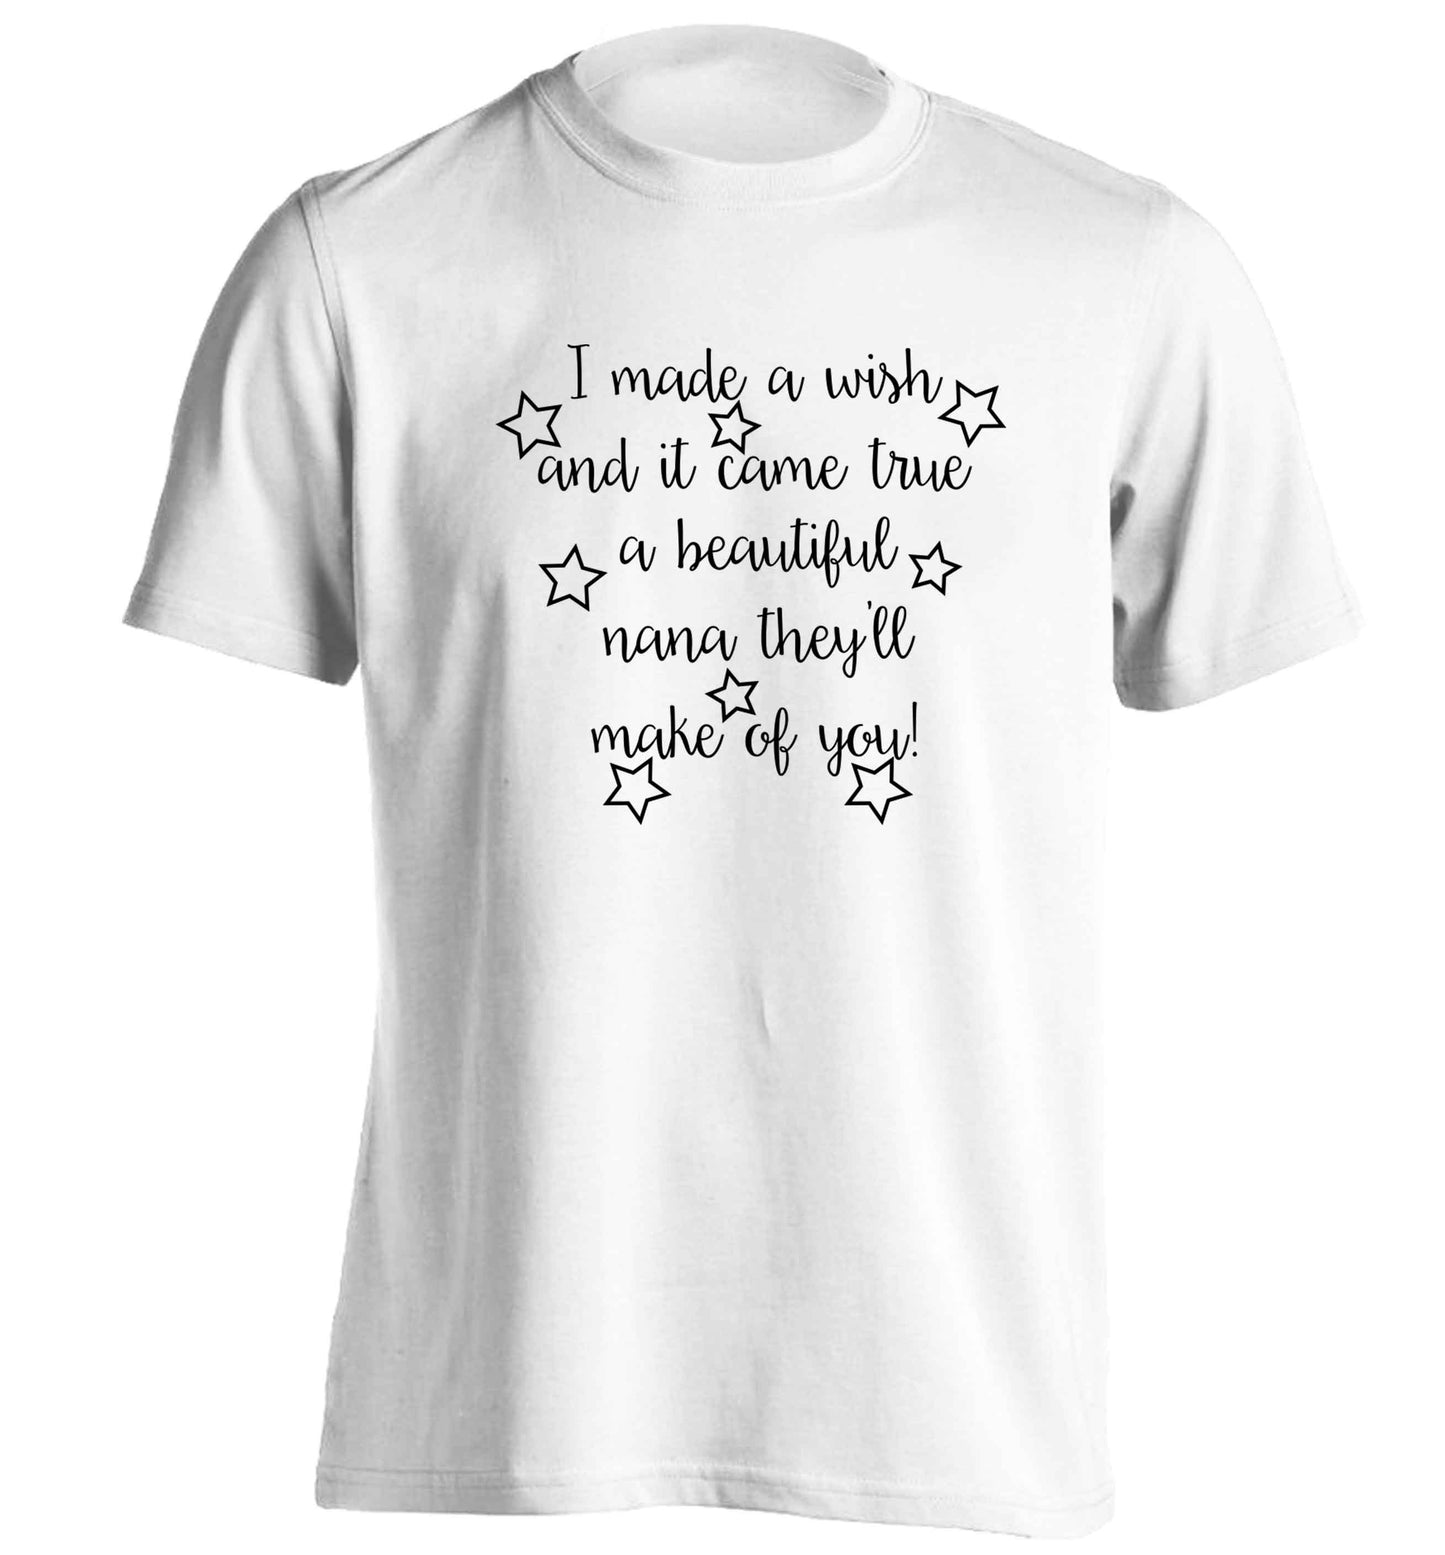 I made a wish and it came true a beautiful nana they'll make of you! adults unisex white Tshirt 2XL